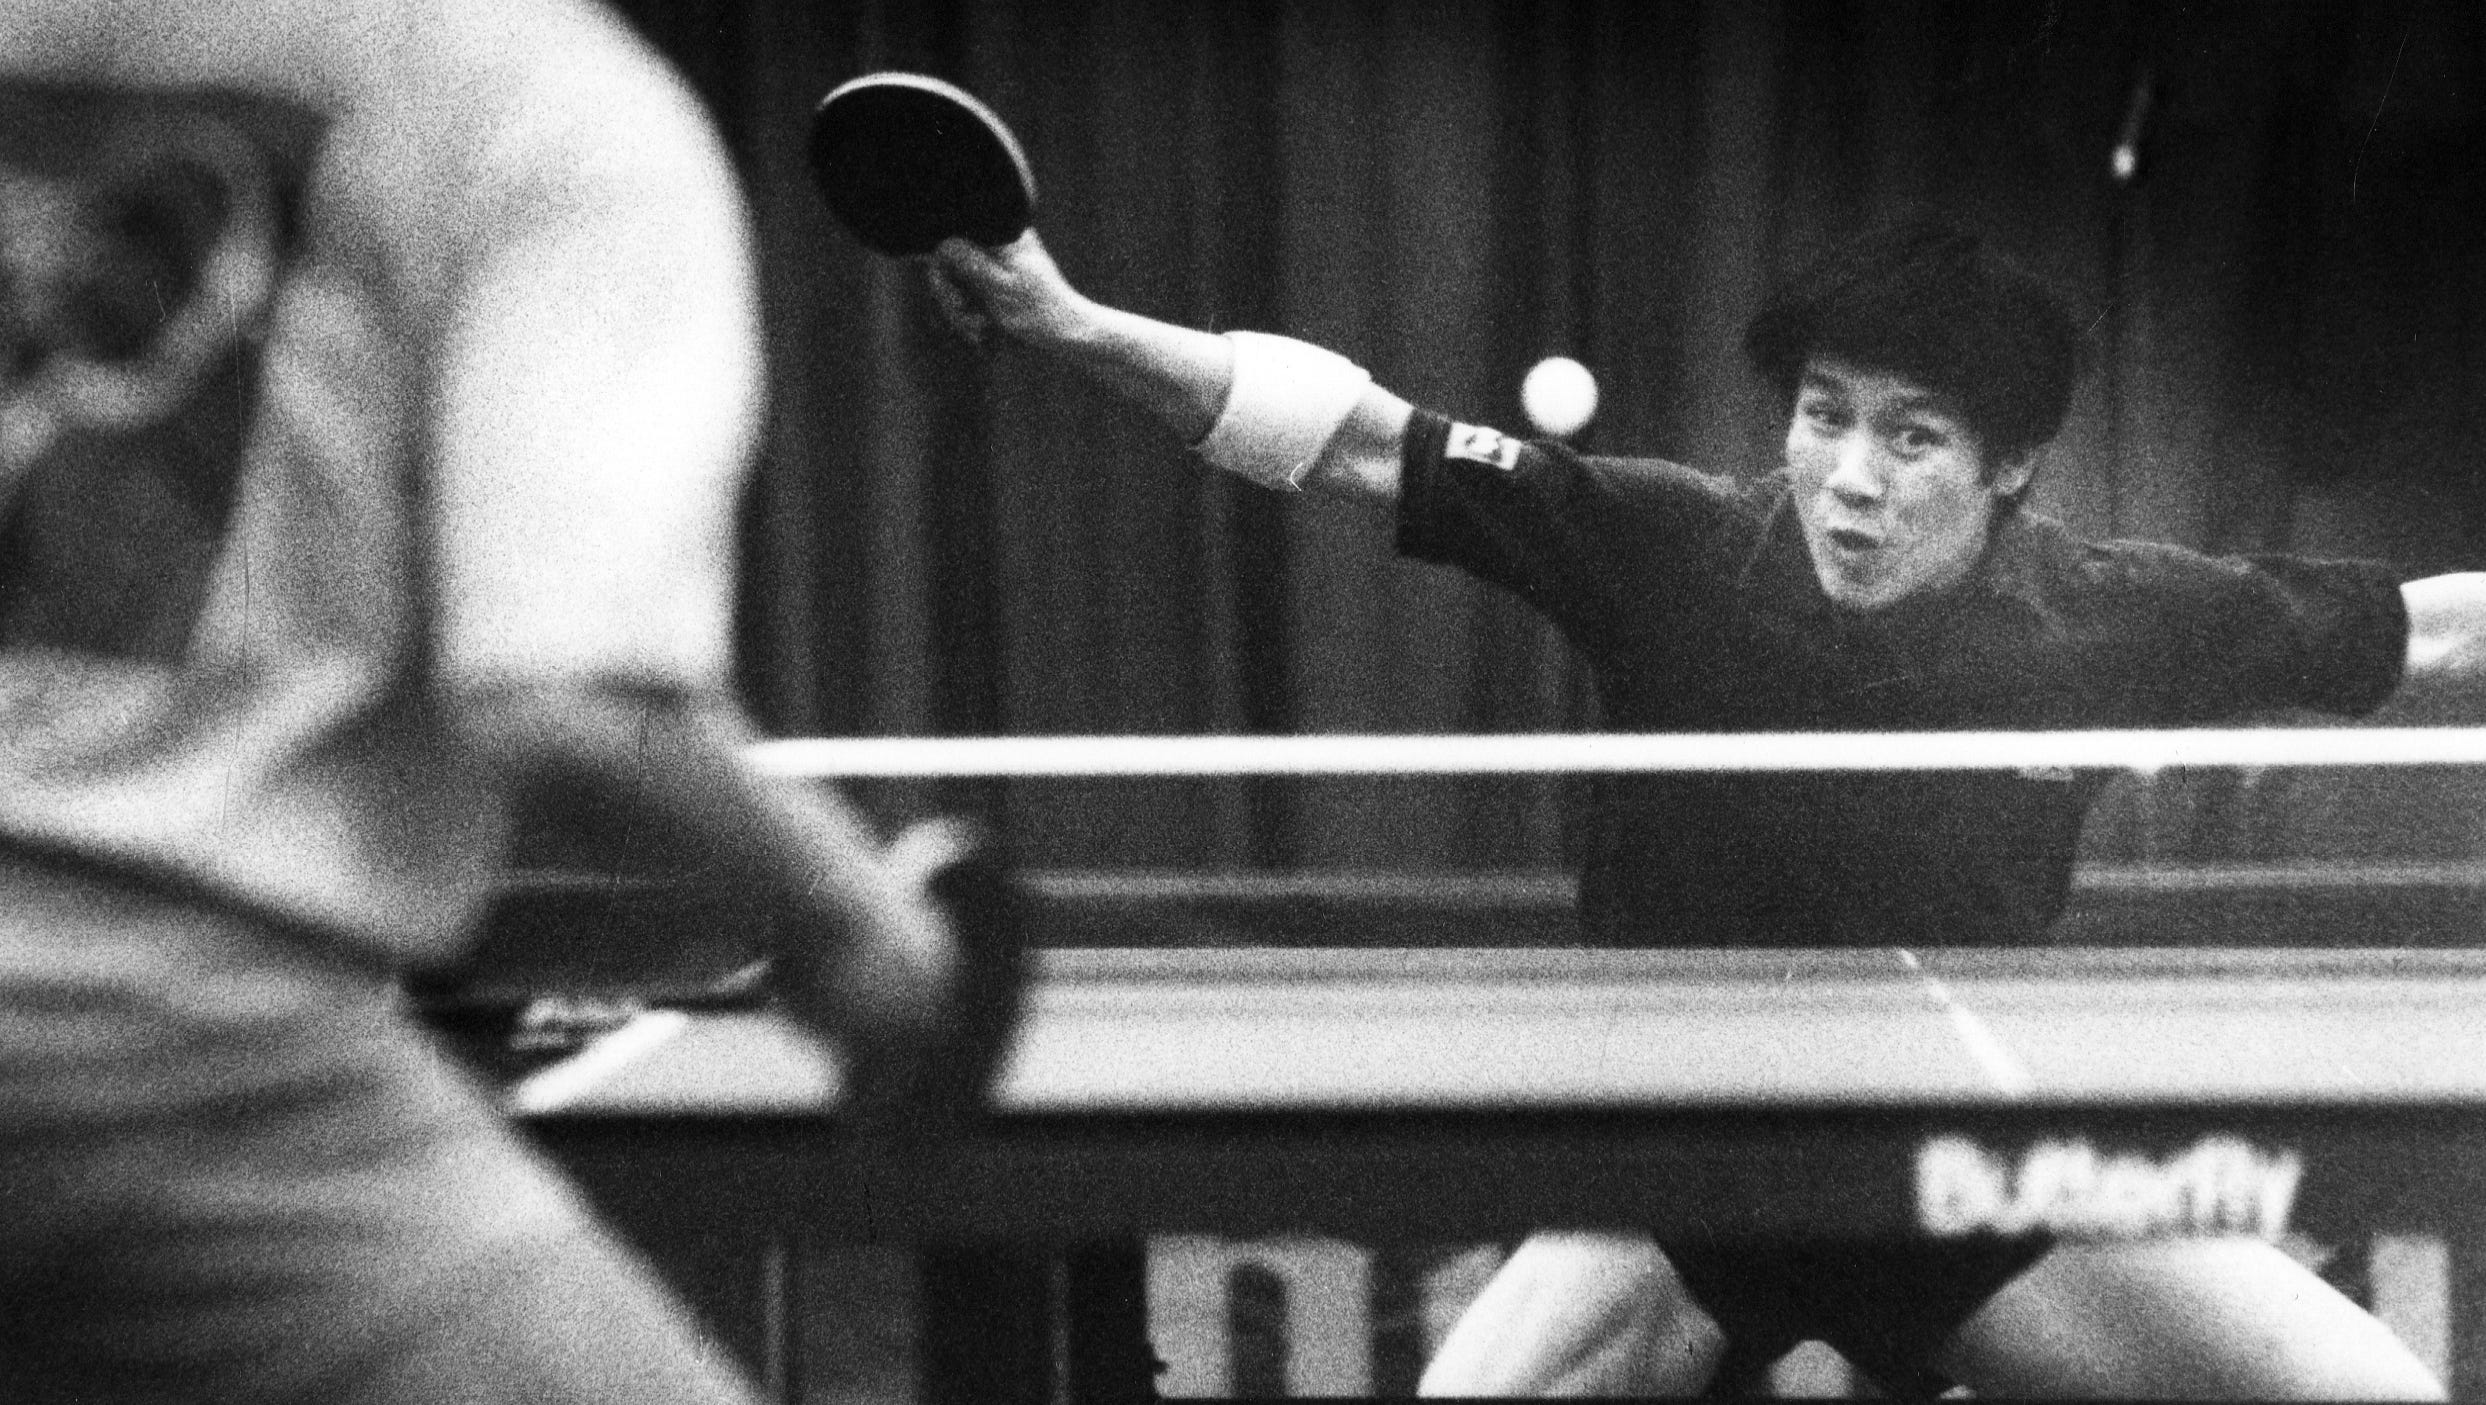 Jack Huang competes in a ping pong championship at Cobo on Nov. 29, 1992.